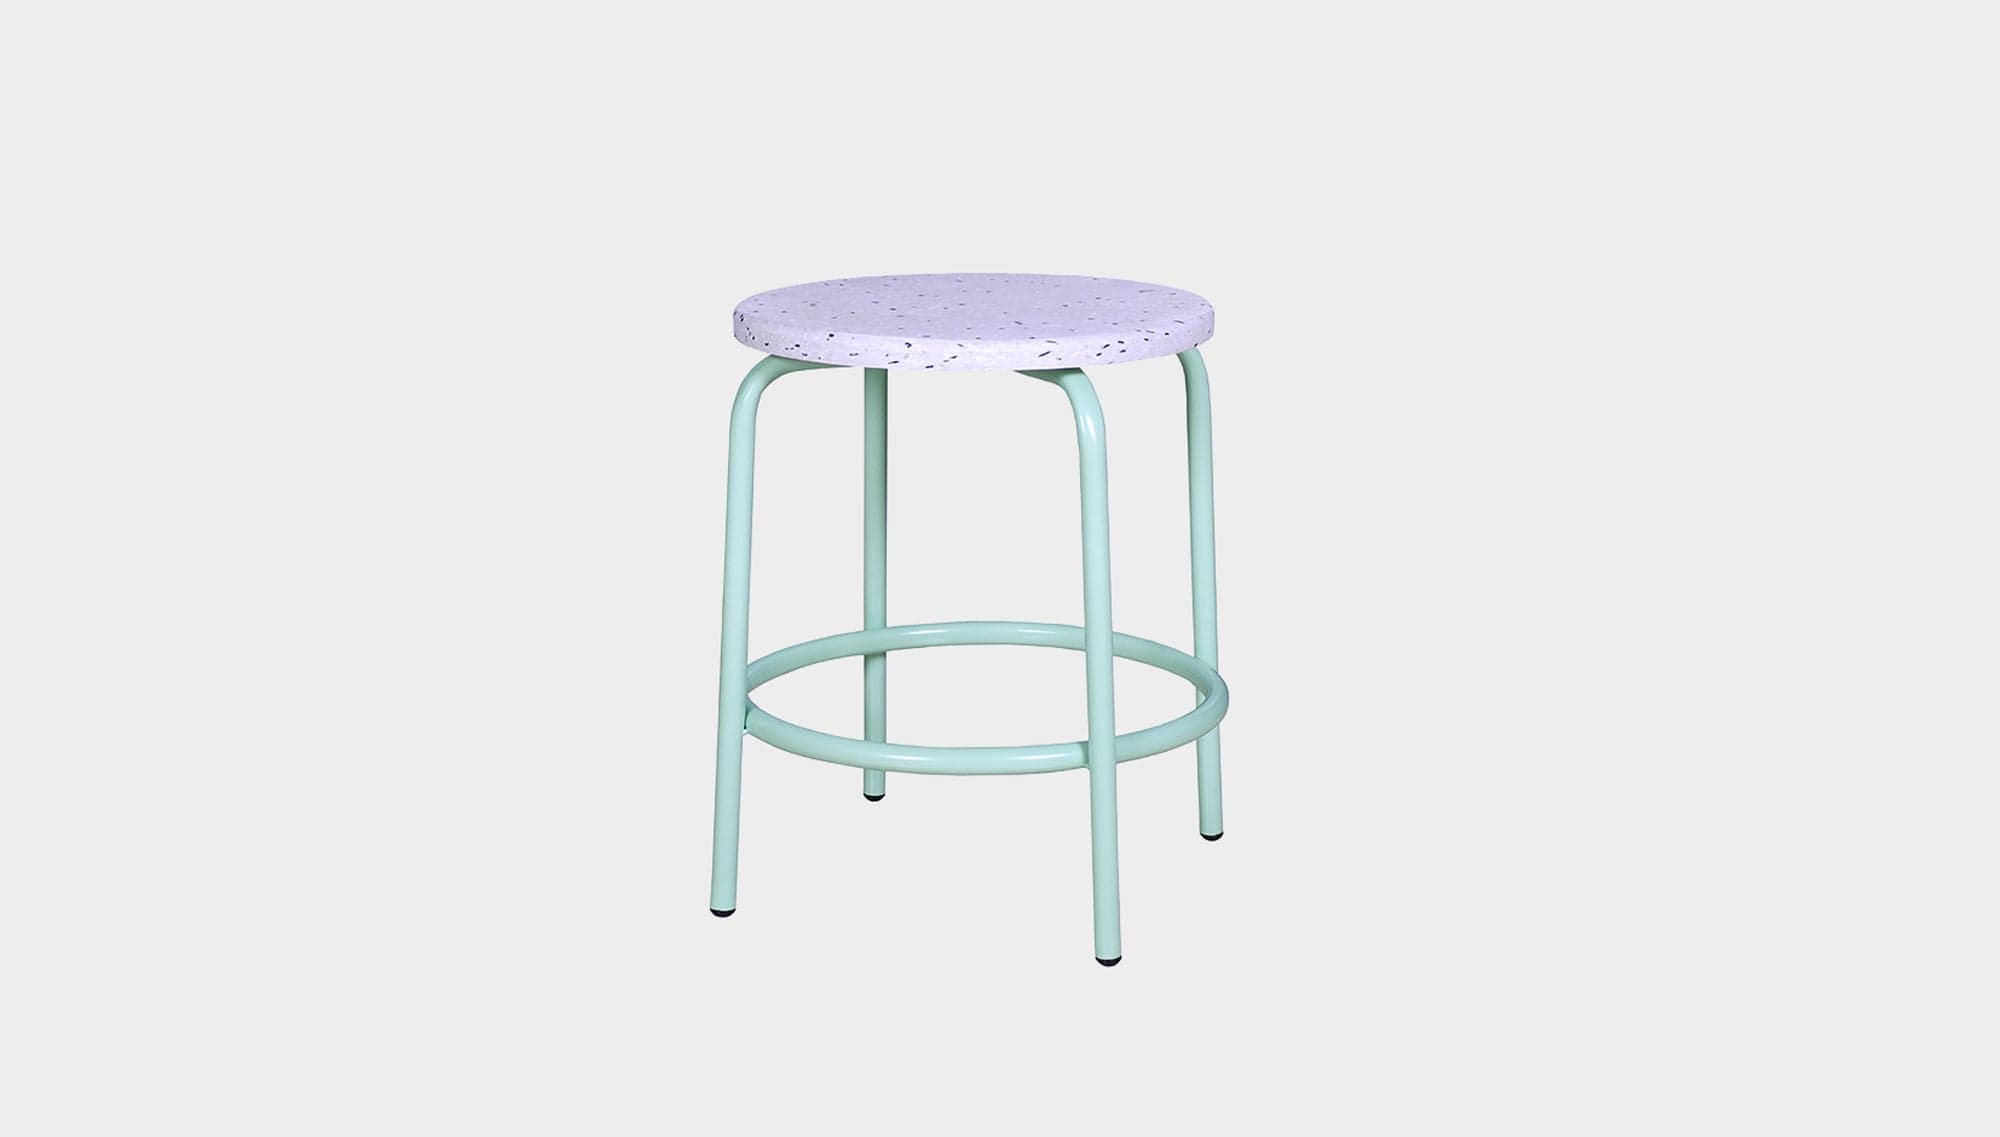 reddie-raw stool 35dia x 45H* cm / Recycled Bottle Tops~Dalmation / Metal~Mint Milton Low Stool - Recycled Plastic